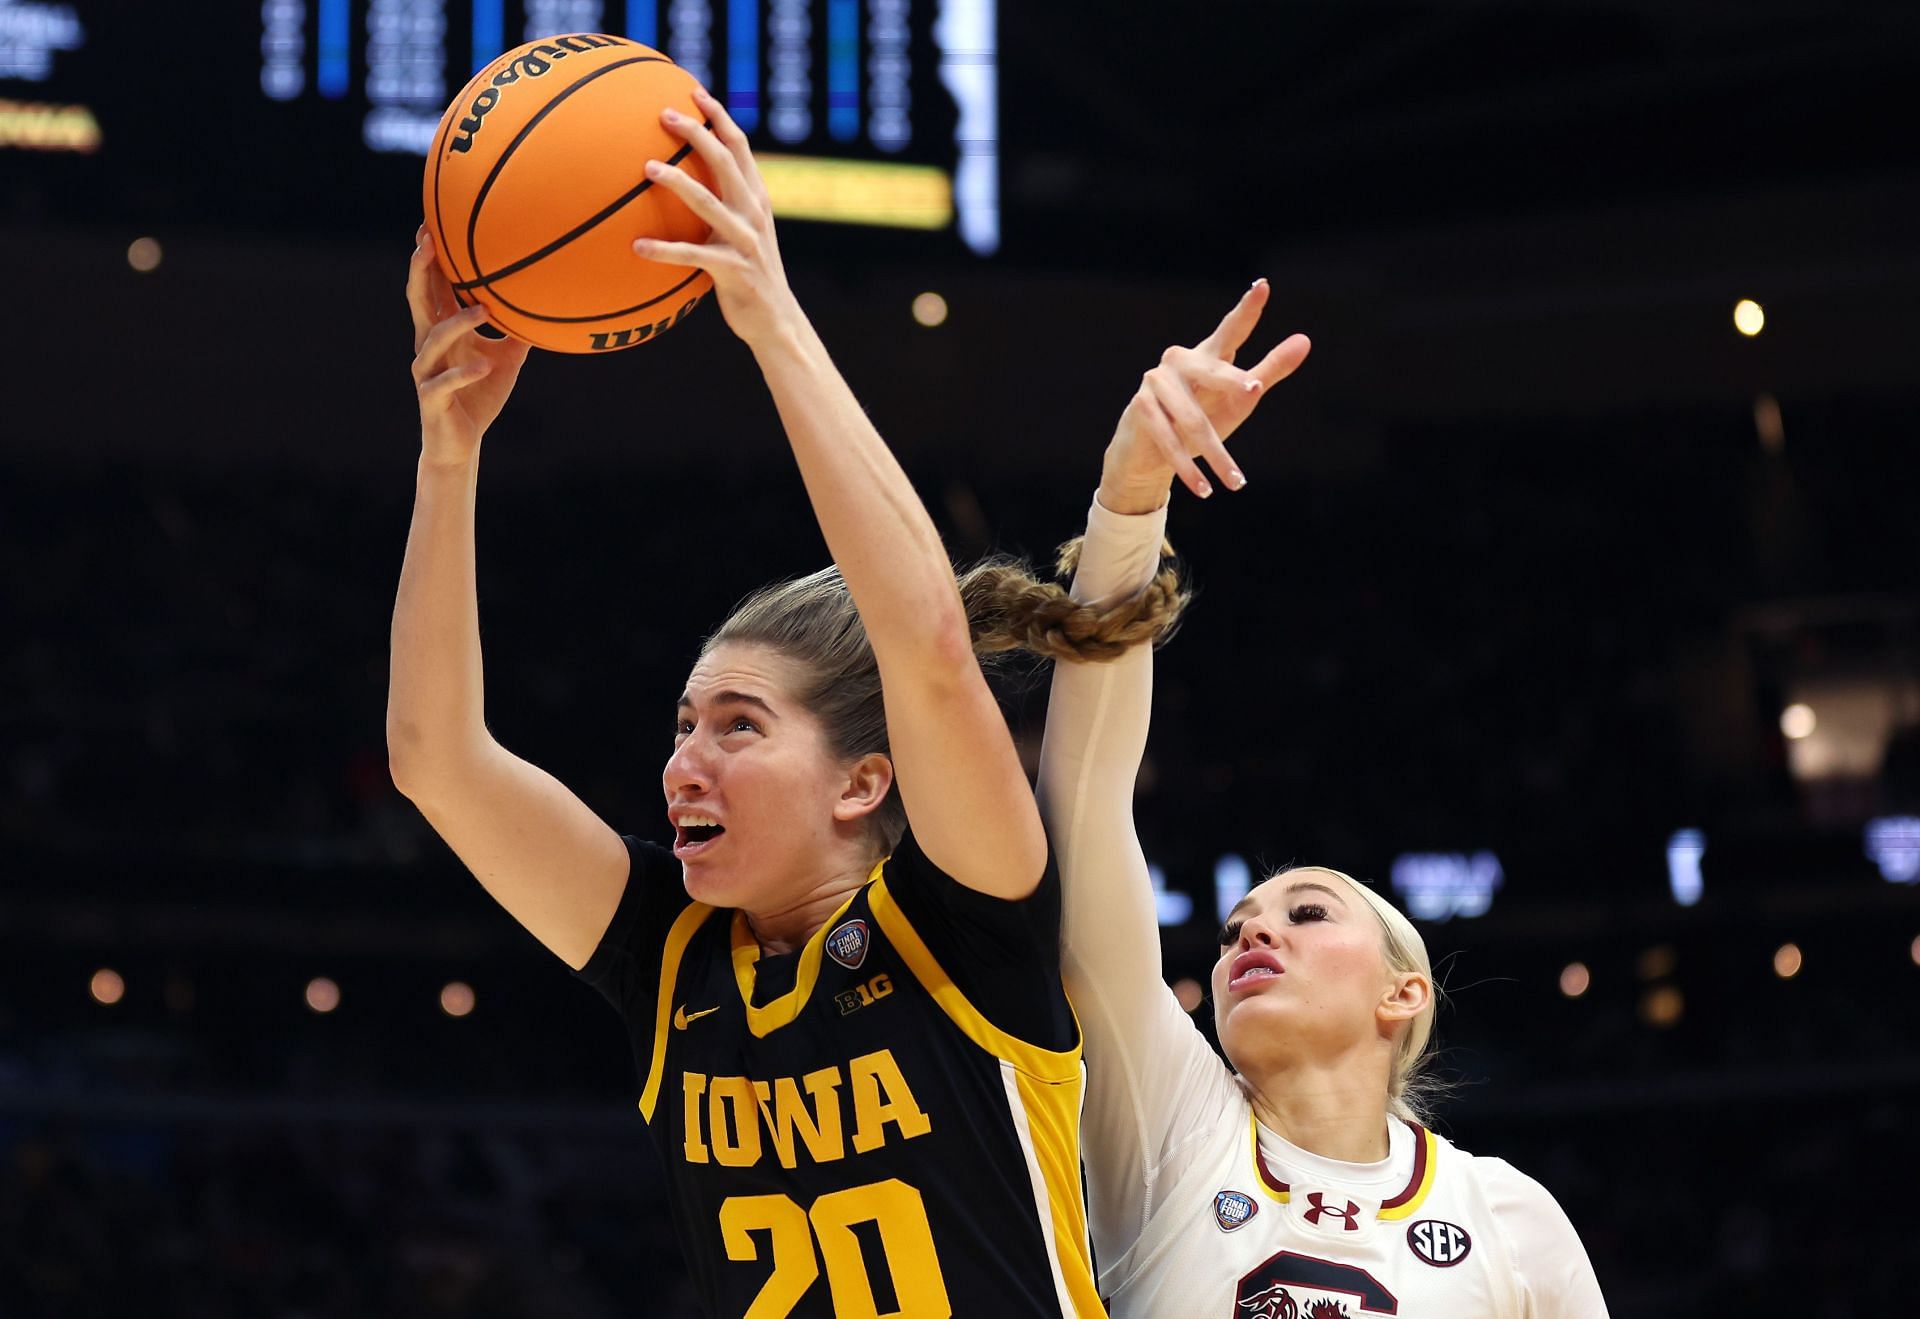 Kate Martin averaged 13.1 points, 6.8 rebounds and 2.0 assists in her last season with Iowa.